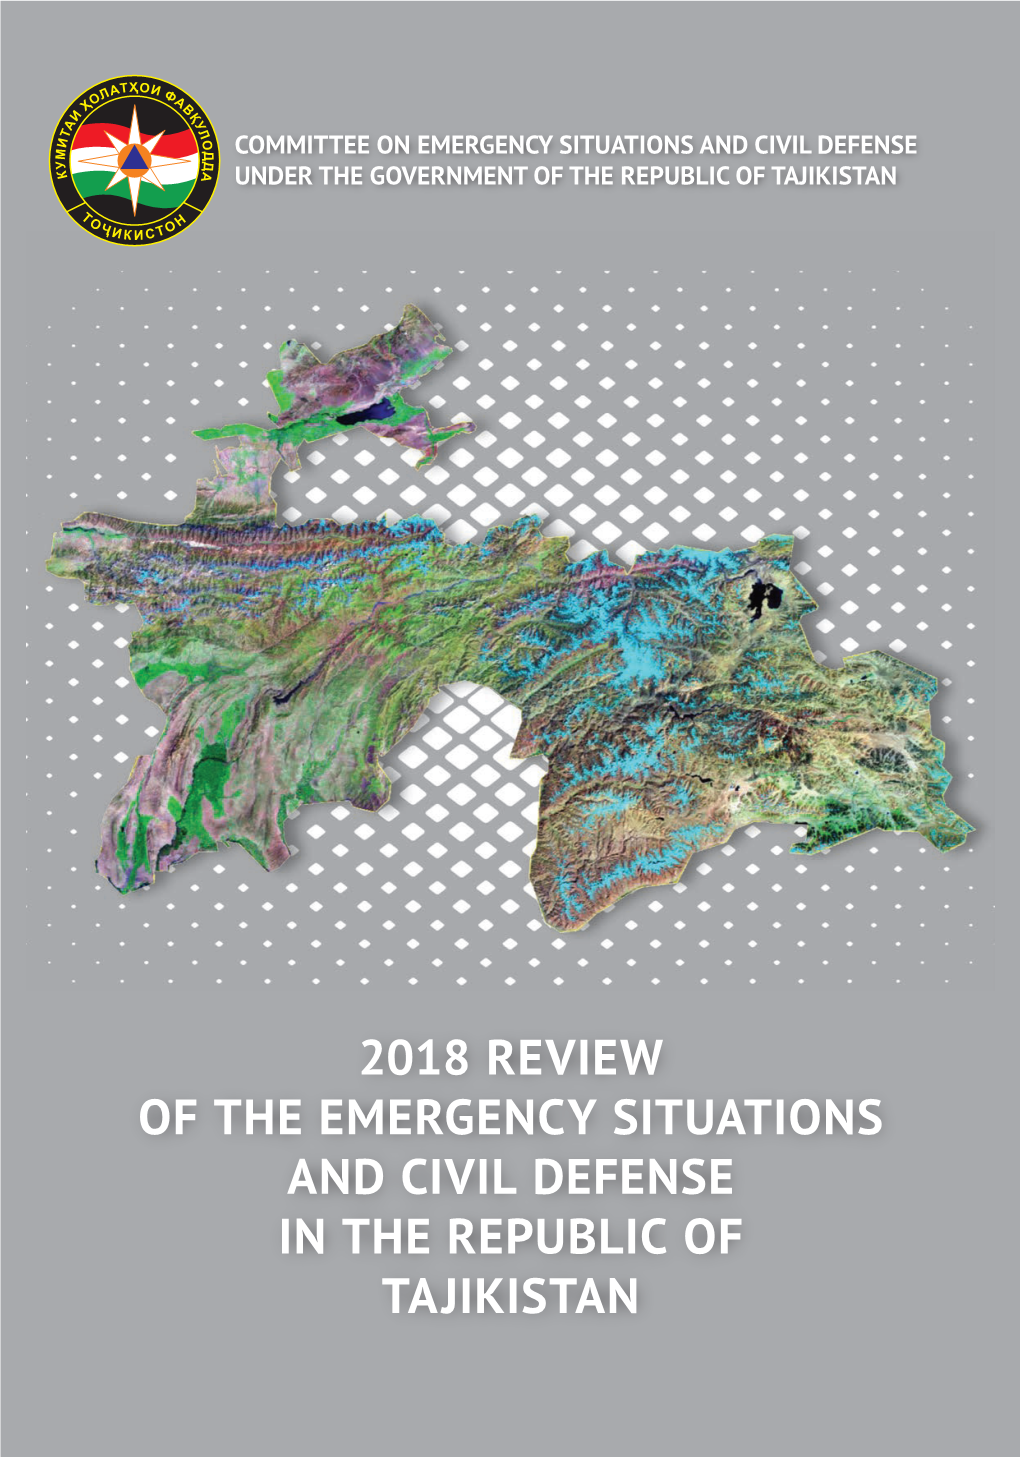 2018 Review of the Emergency Situations and Civil Defense